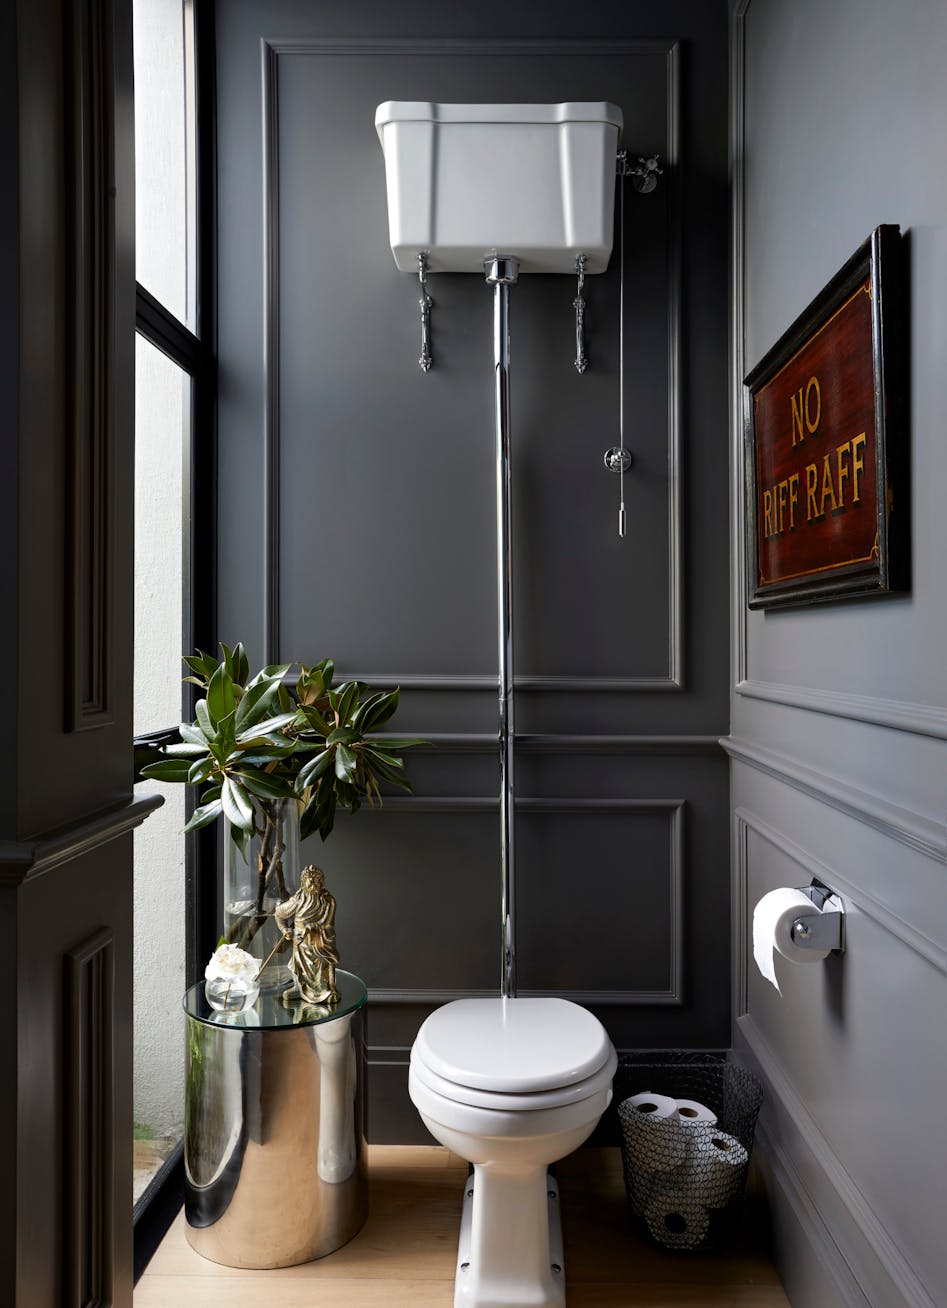 A bathroom with a toilet in the middle, a steel side table to left and a framed artwork on the wall to the right.